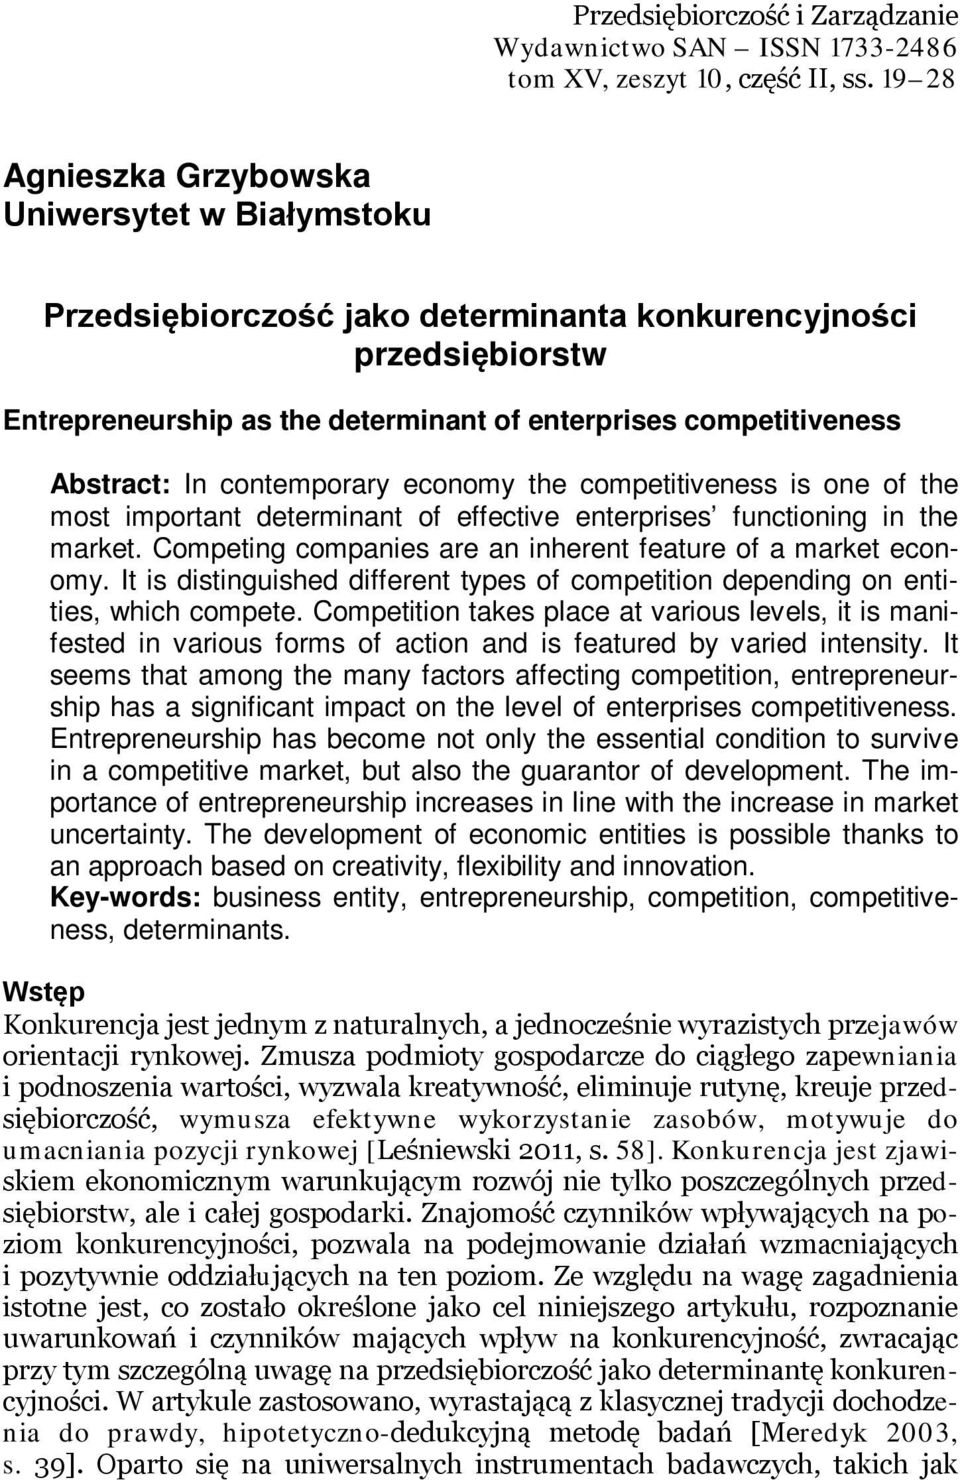 In contemporary economy the competitiveness is one of the most important determinant of effective enterprises functioning in the market.